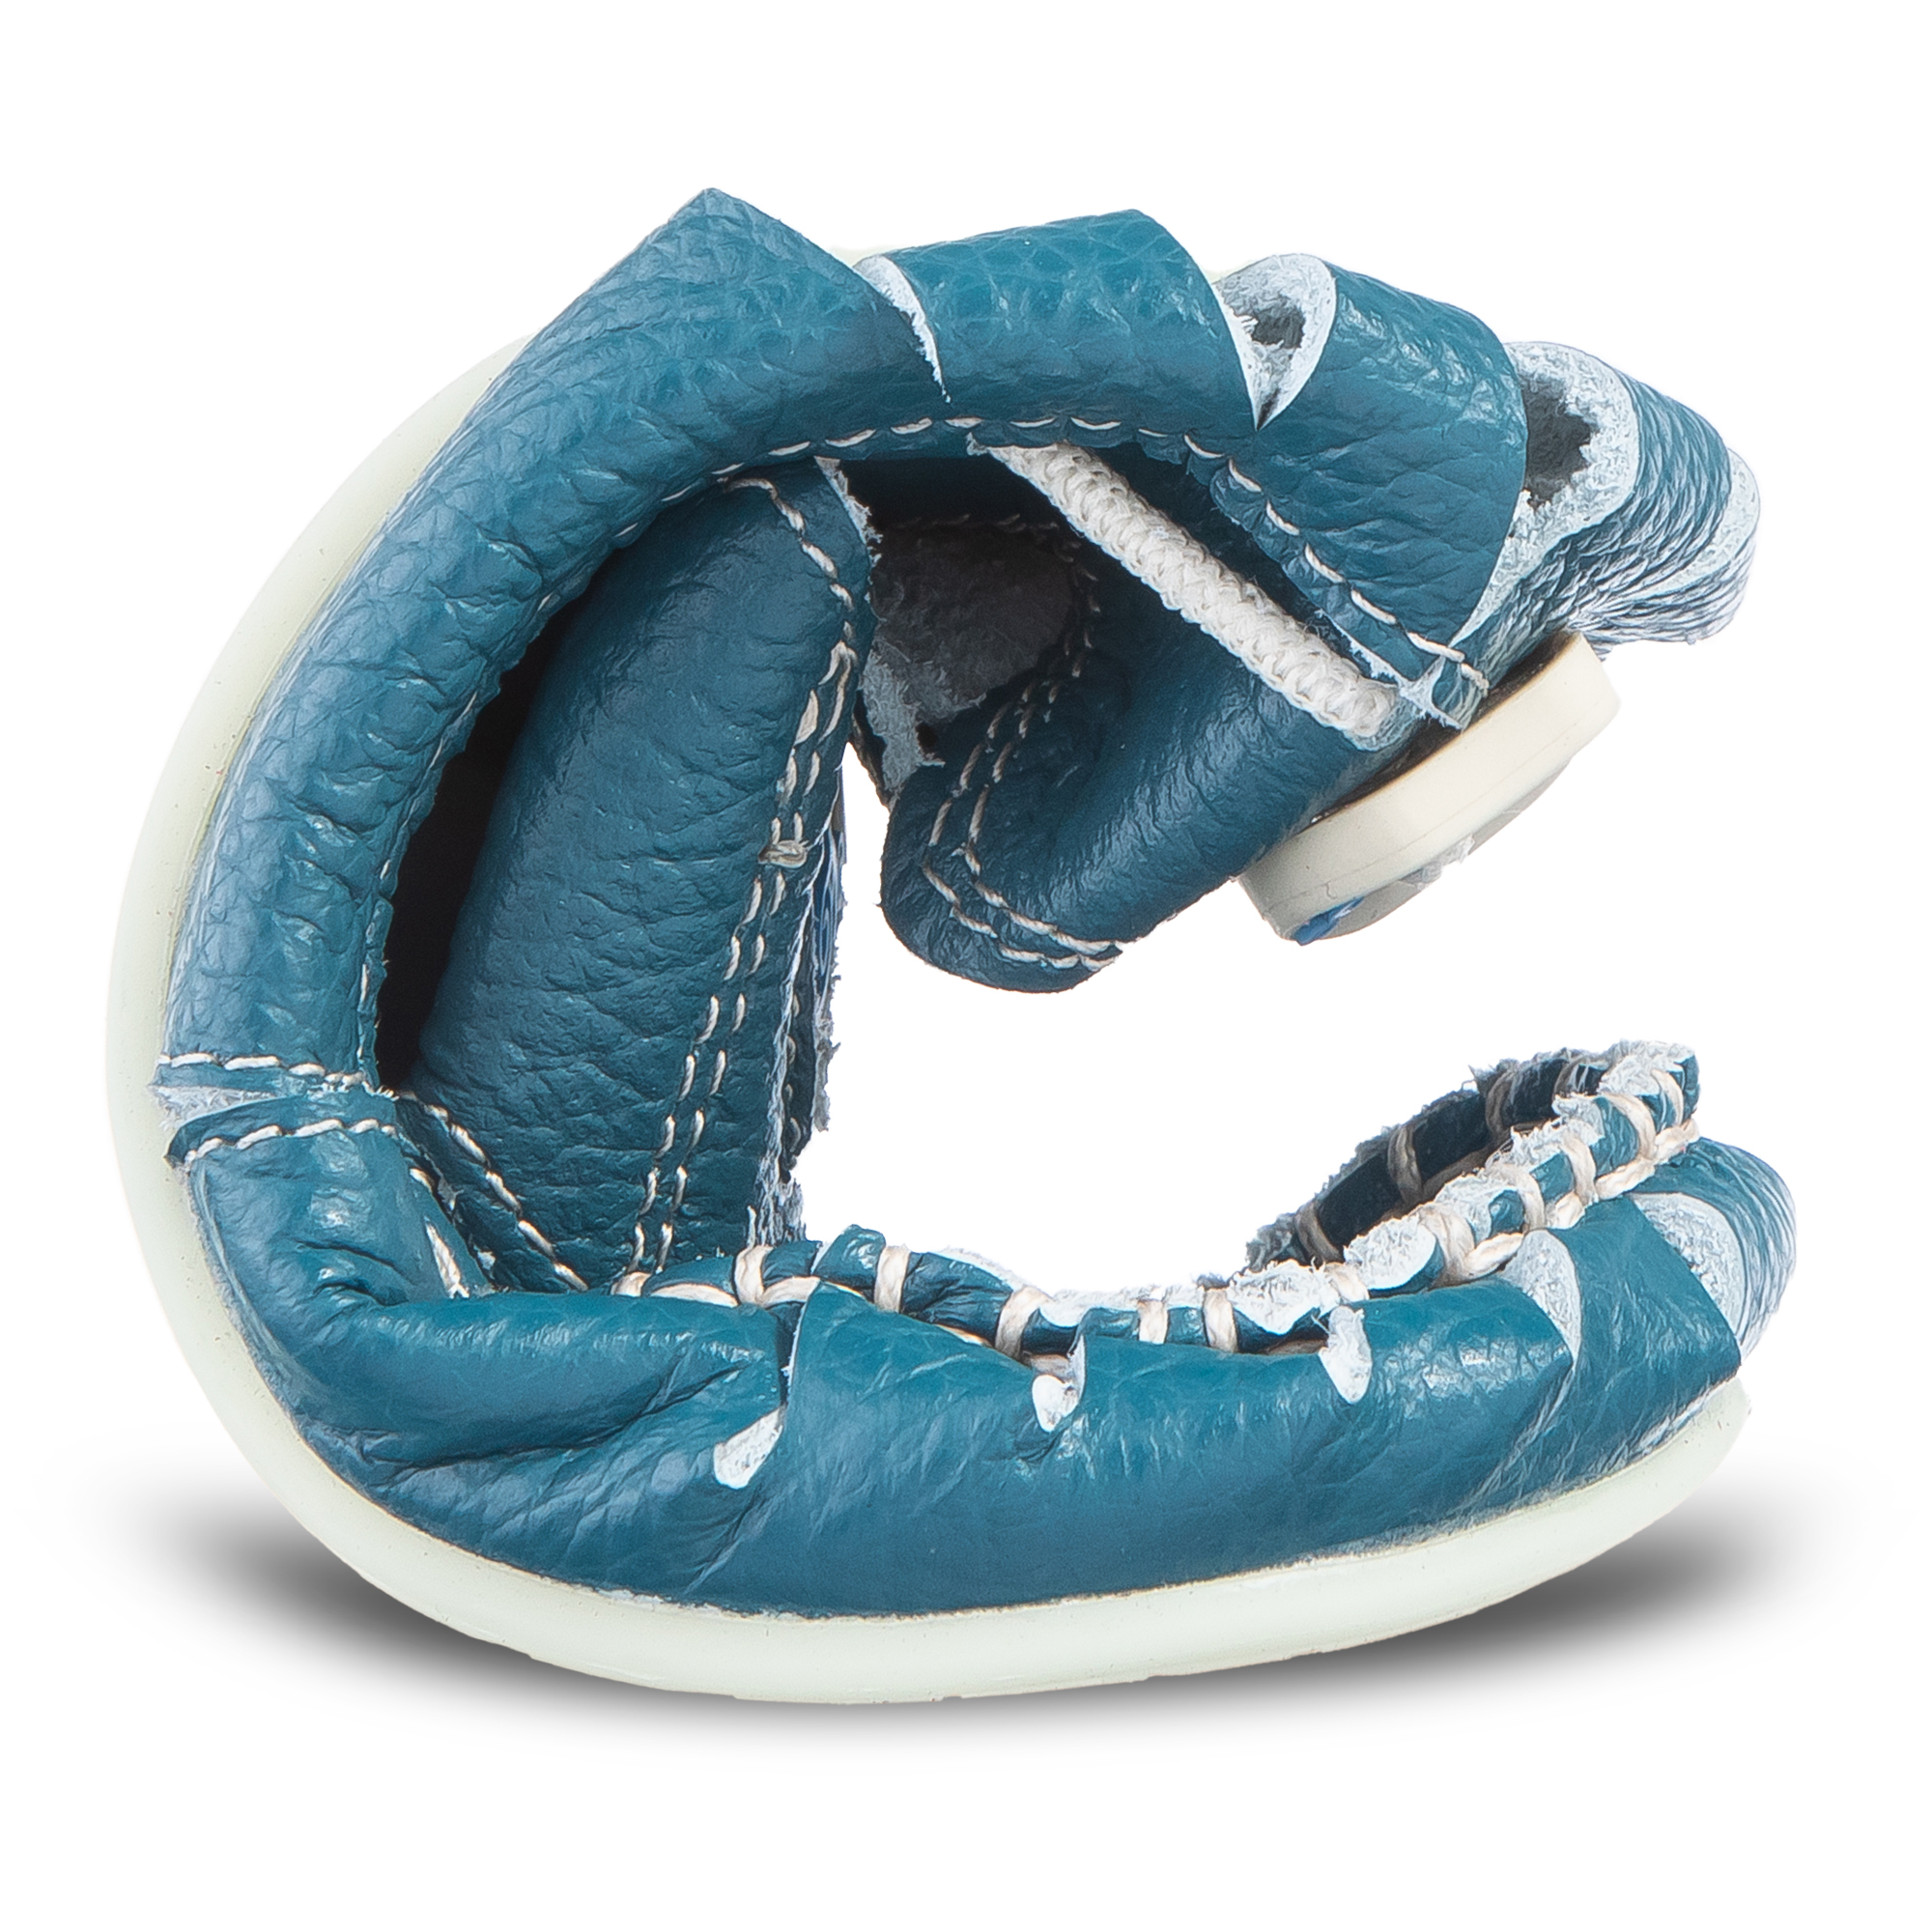 Hand-sewn, soft sole baby shoes - Magical Shoes MOXY BABY